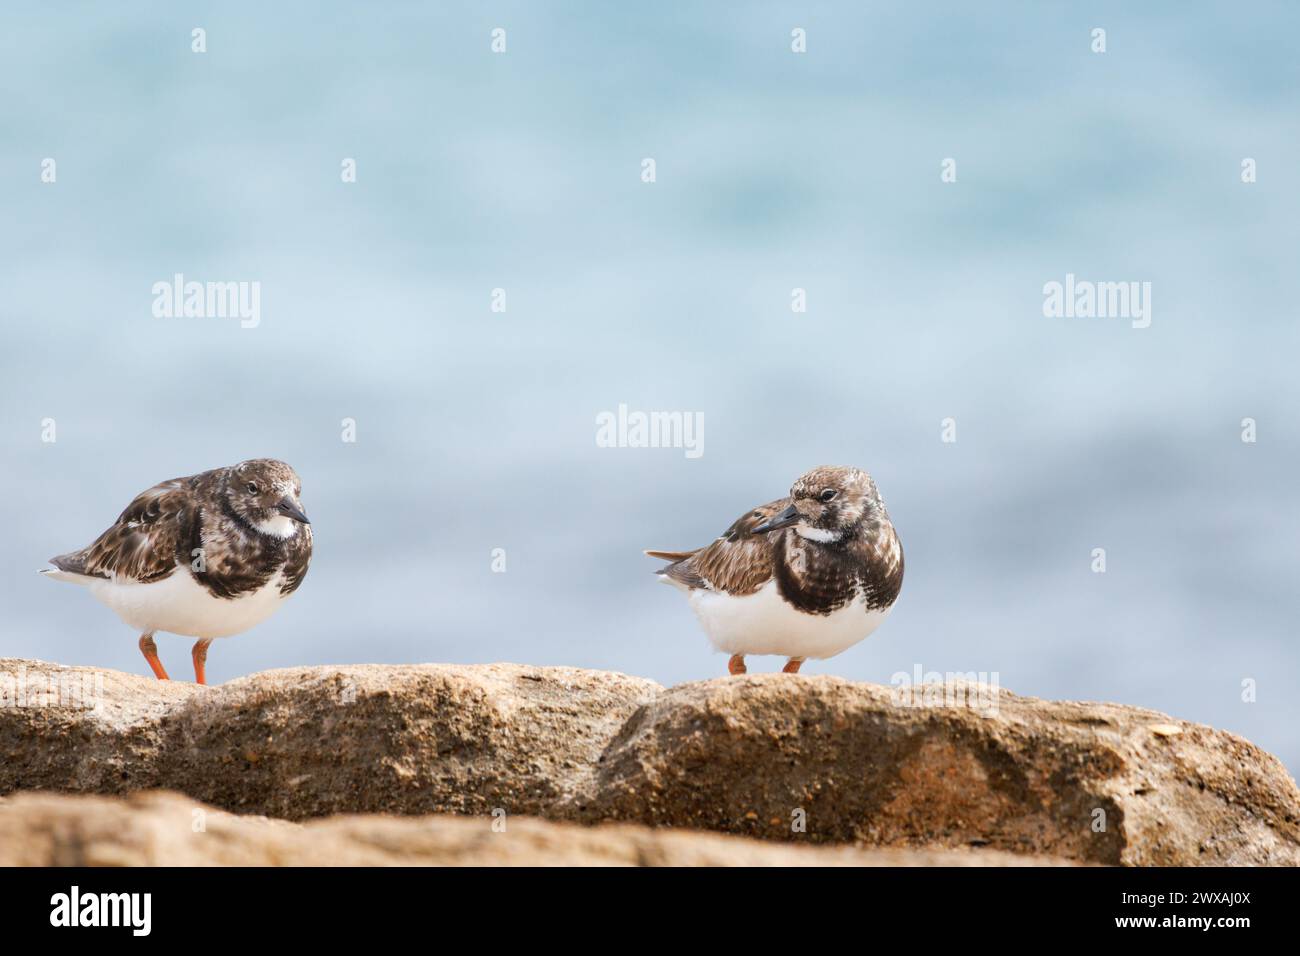 Two Turnstones, Arenaria interpres, perched on rock in the protected area of the Agua Amarga salt marsh beach, Alicante, Spain Stock Photo